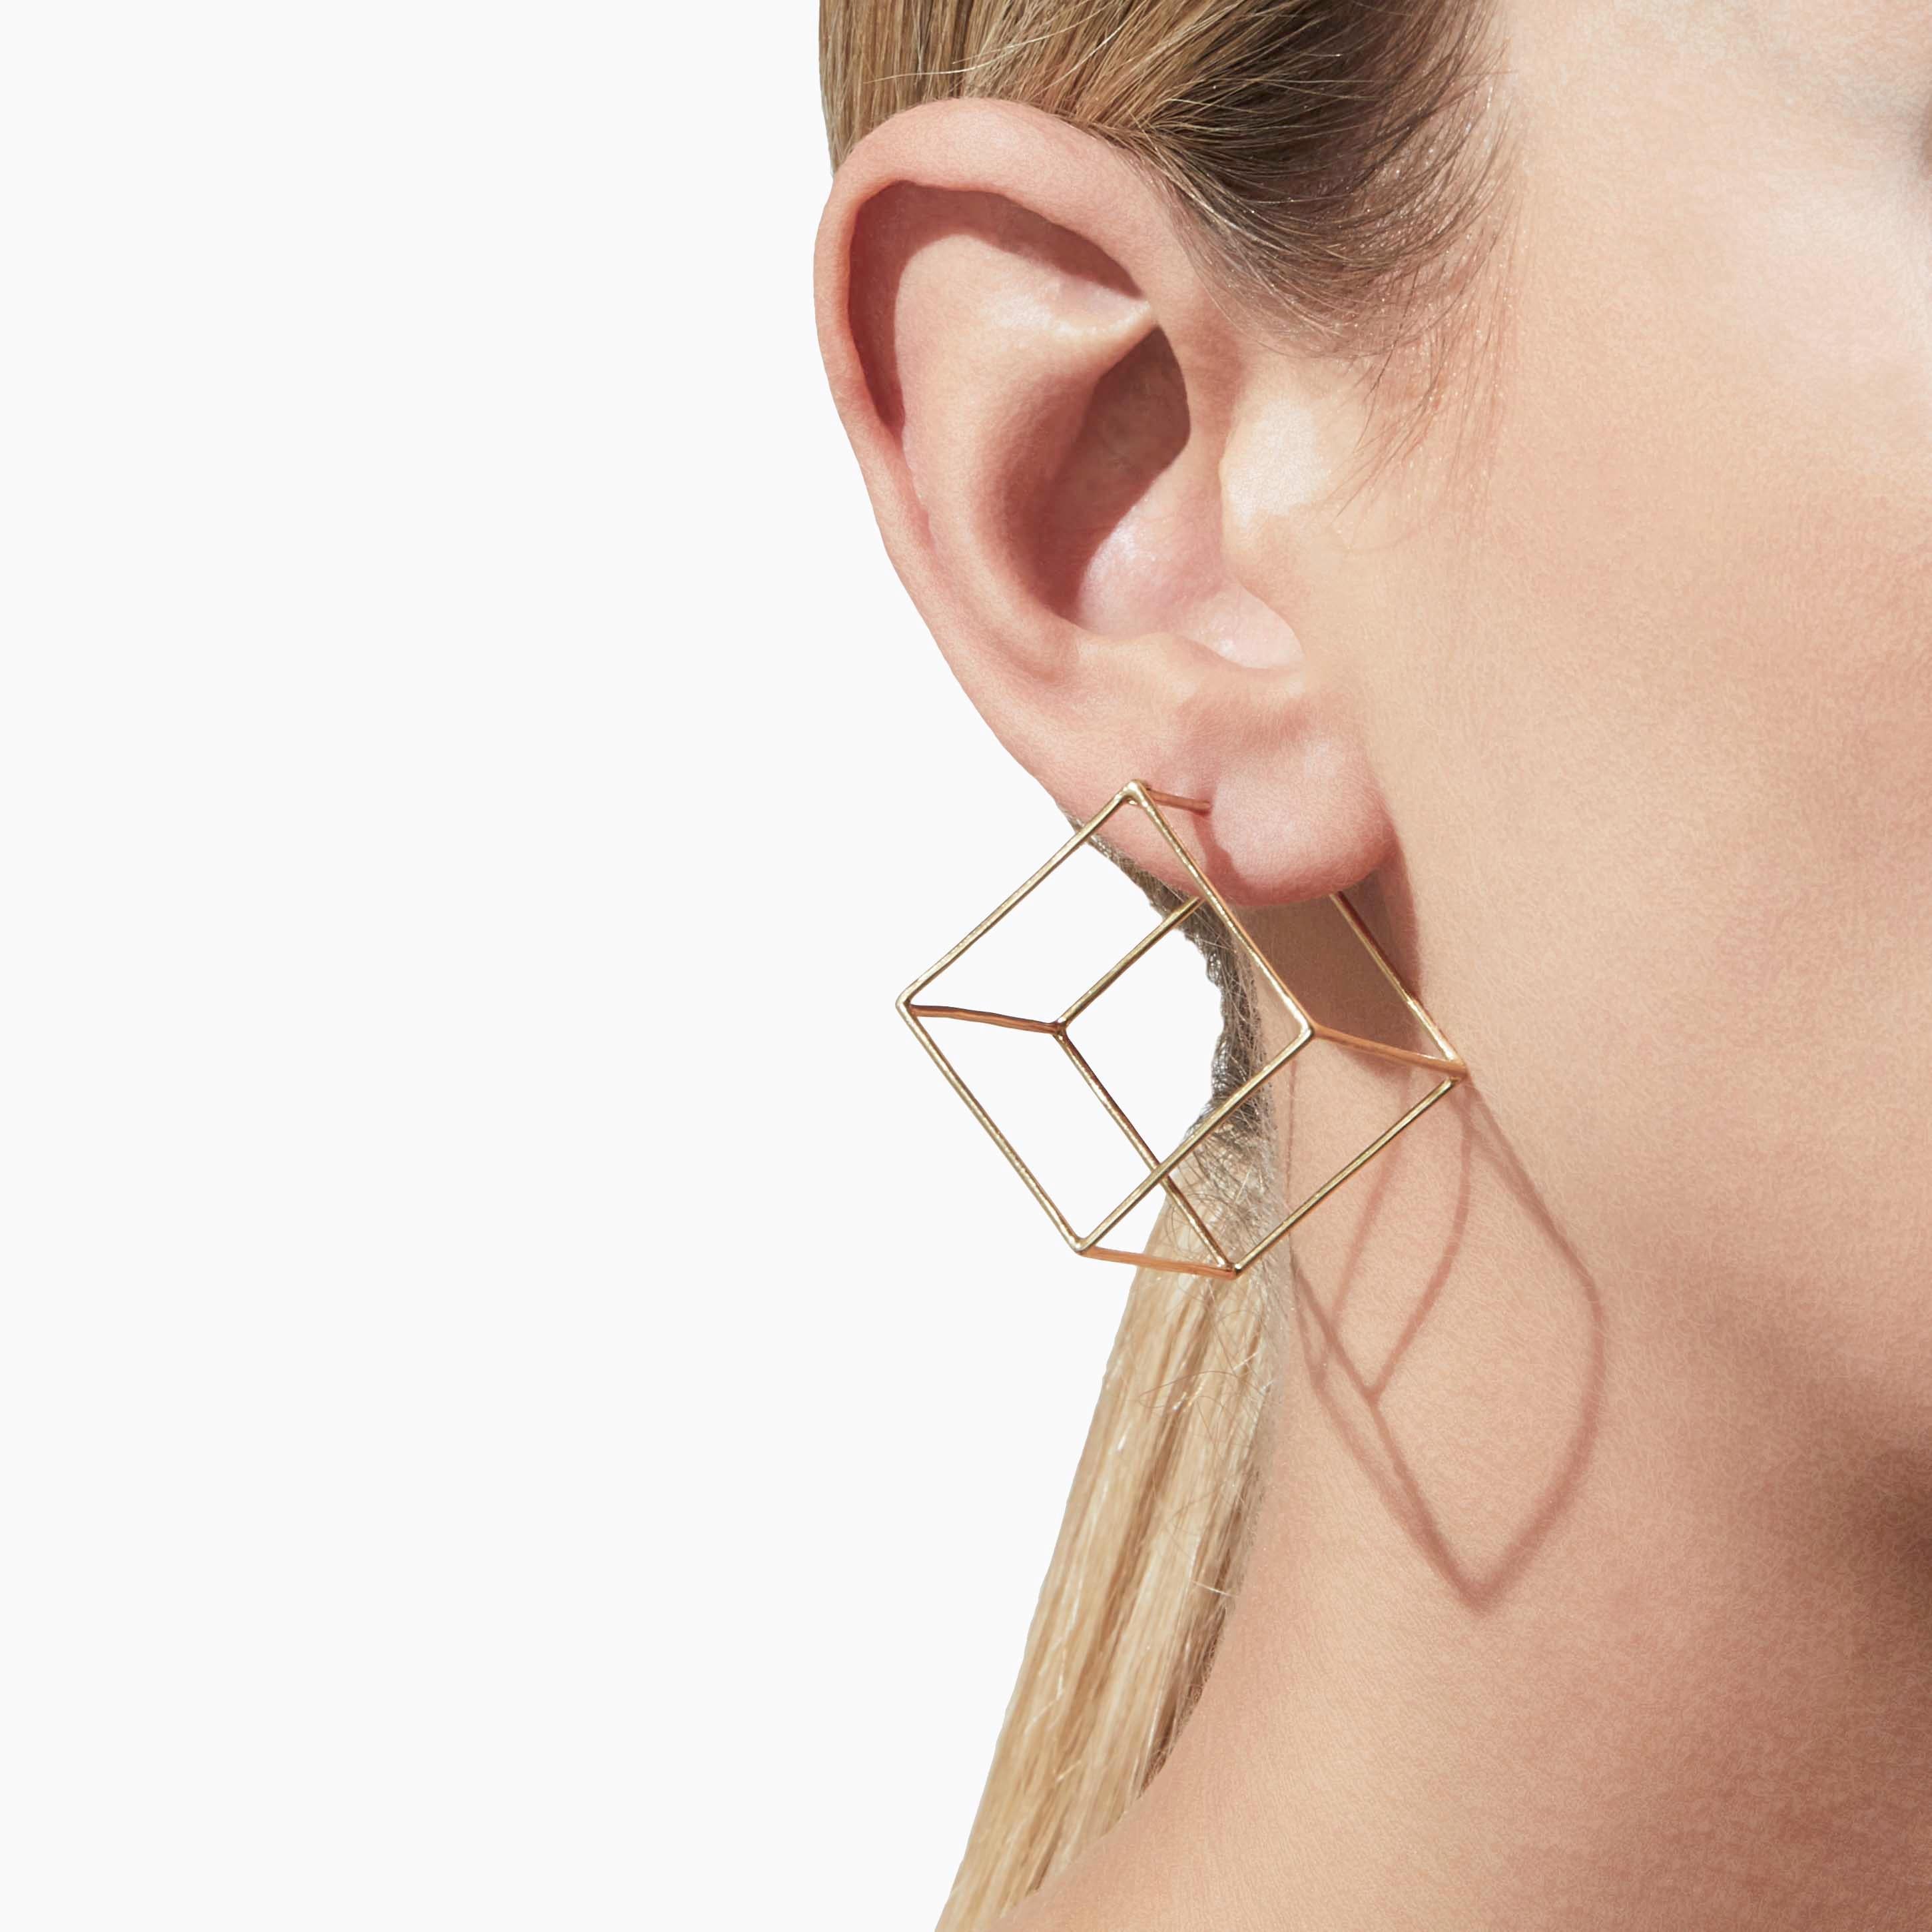 The three dimensional cubic form appears to float seamlessly around the earlobe when worn. One side is an earring post. You can alter the point at which the earring hangs depending on how you want it to appear. 

18 Karat Yellow Gold Square Pair